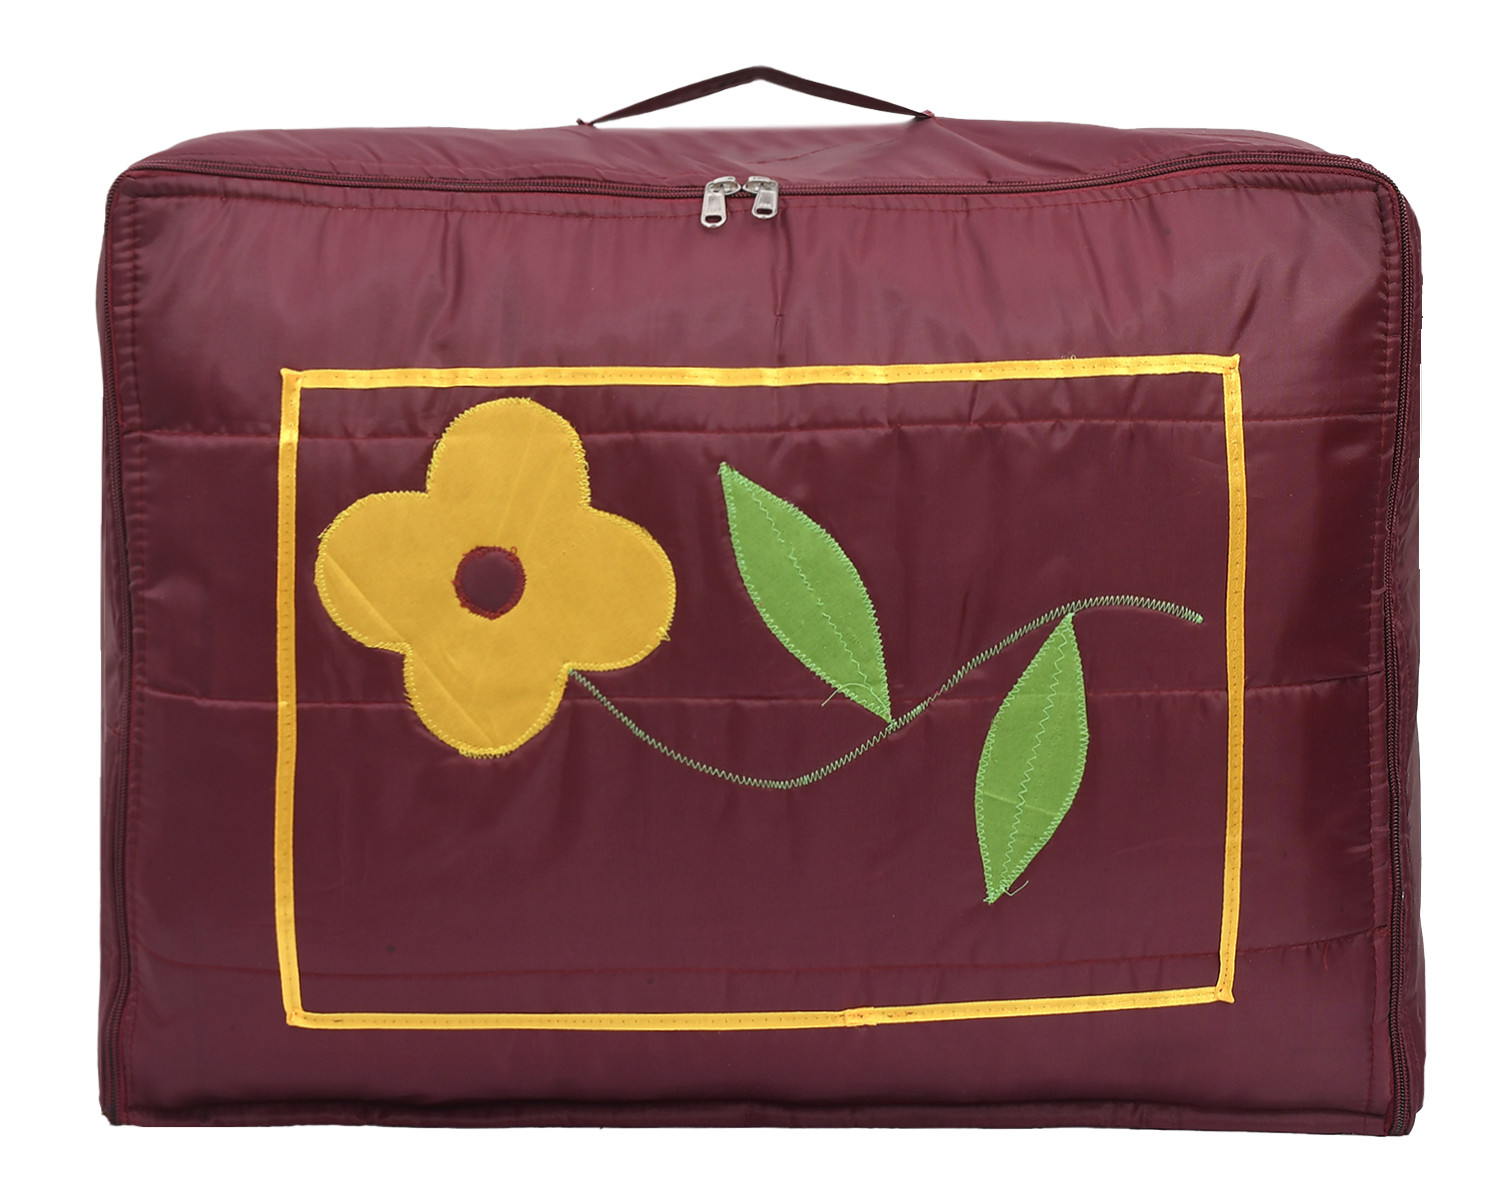 Kuber Industries Multiuses Flower Print Foldable Polyster Saree Covers/Clothes Storage Bag/Wardrobe Organizer (Maroon)